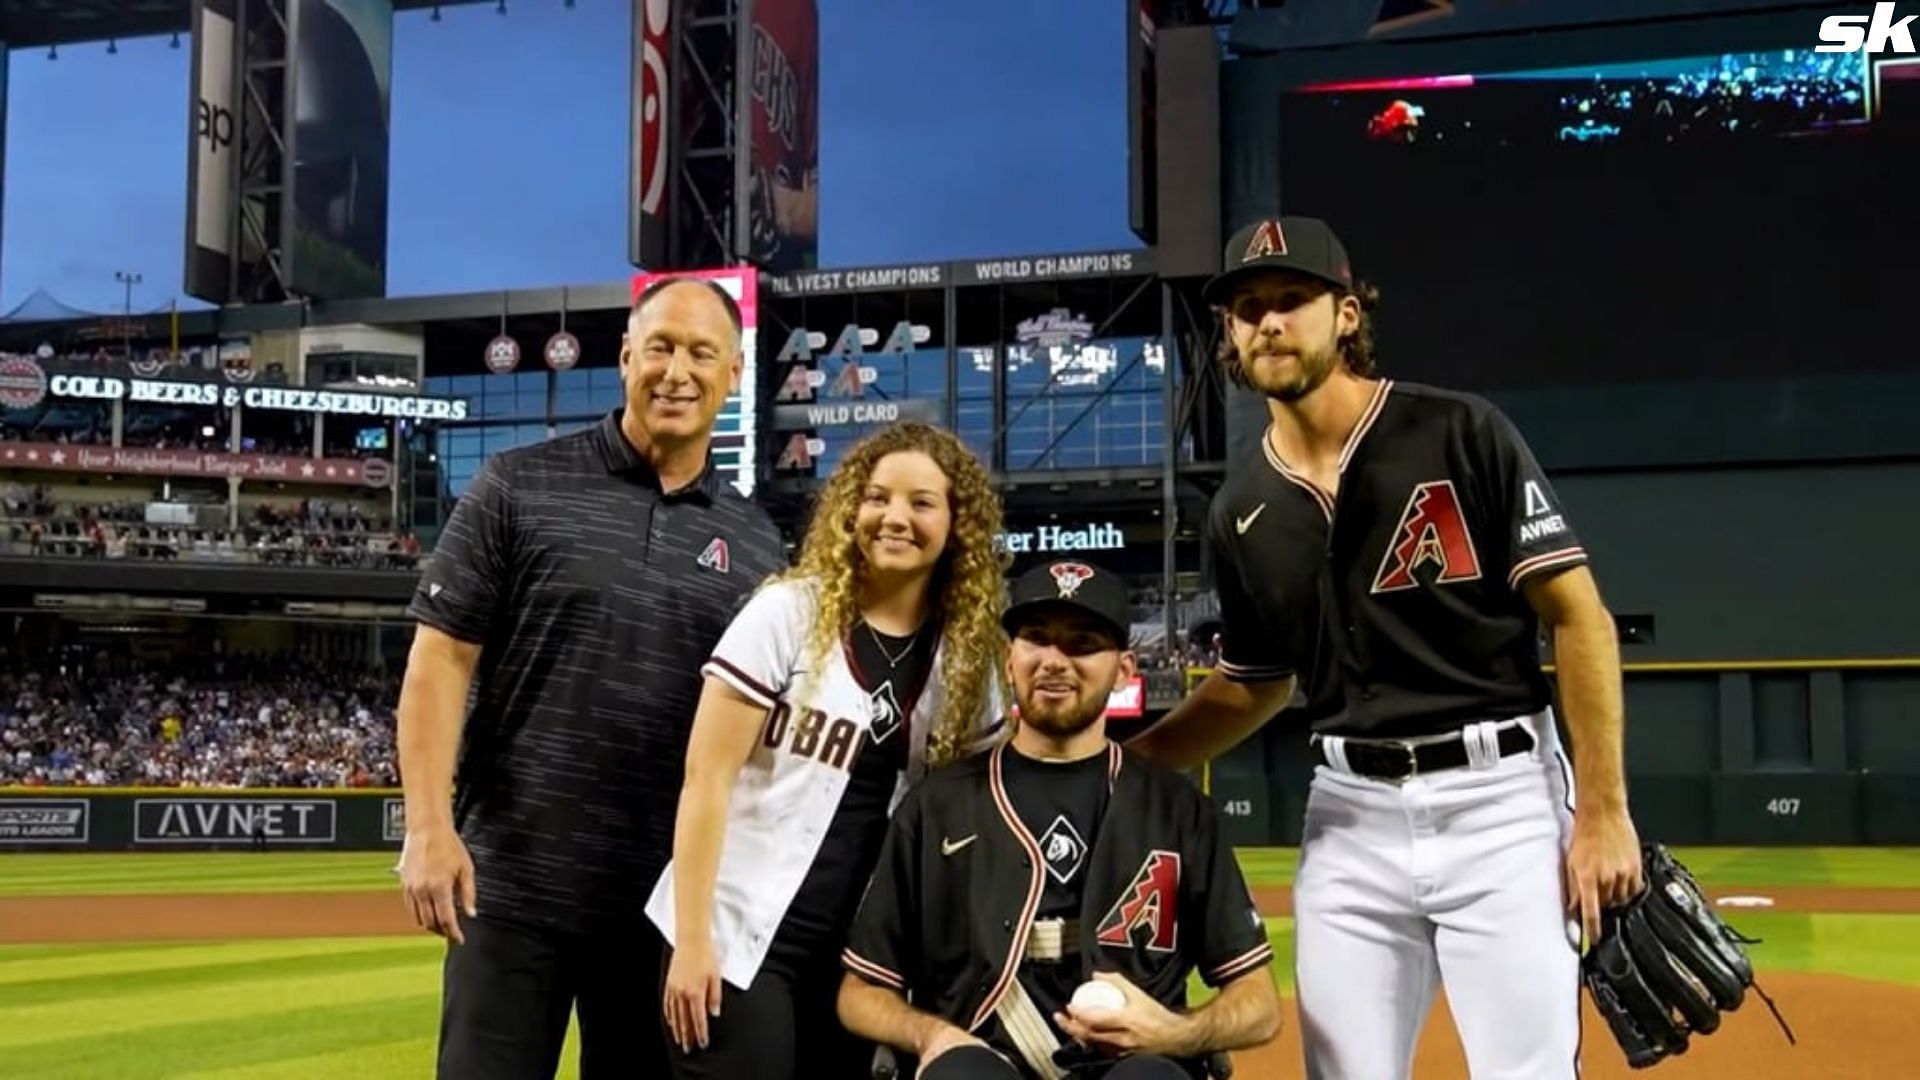 An emotional moment for Tyler Moldovan after throwing the ceremonial opening pitch in the Arizona Diamondbacks game